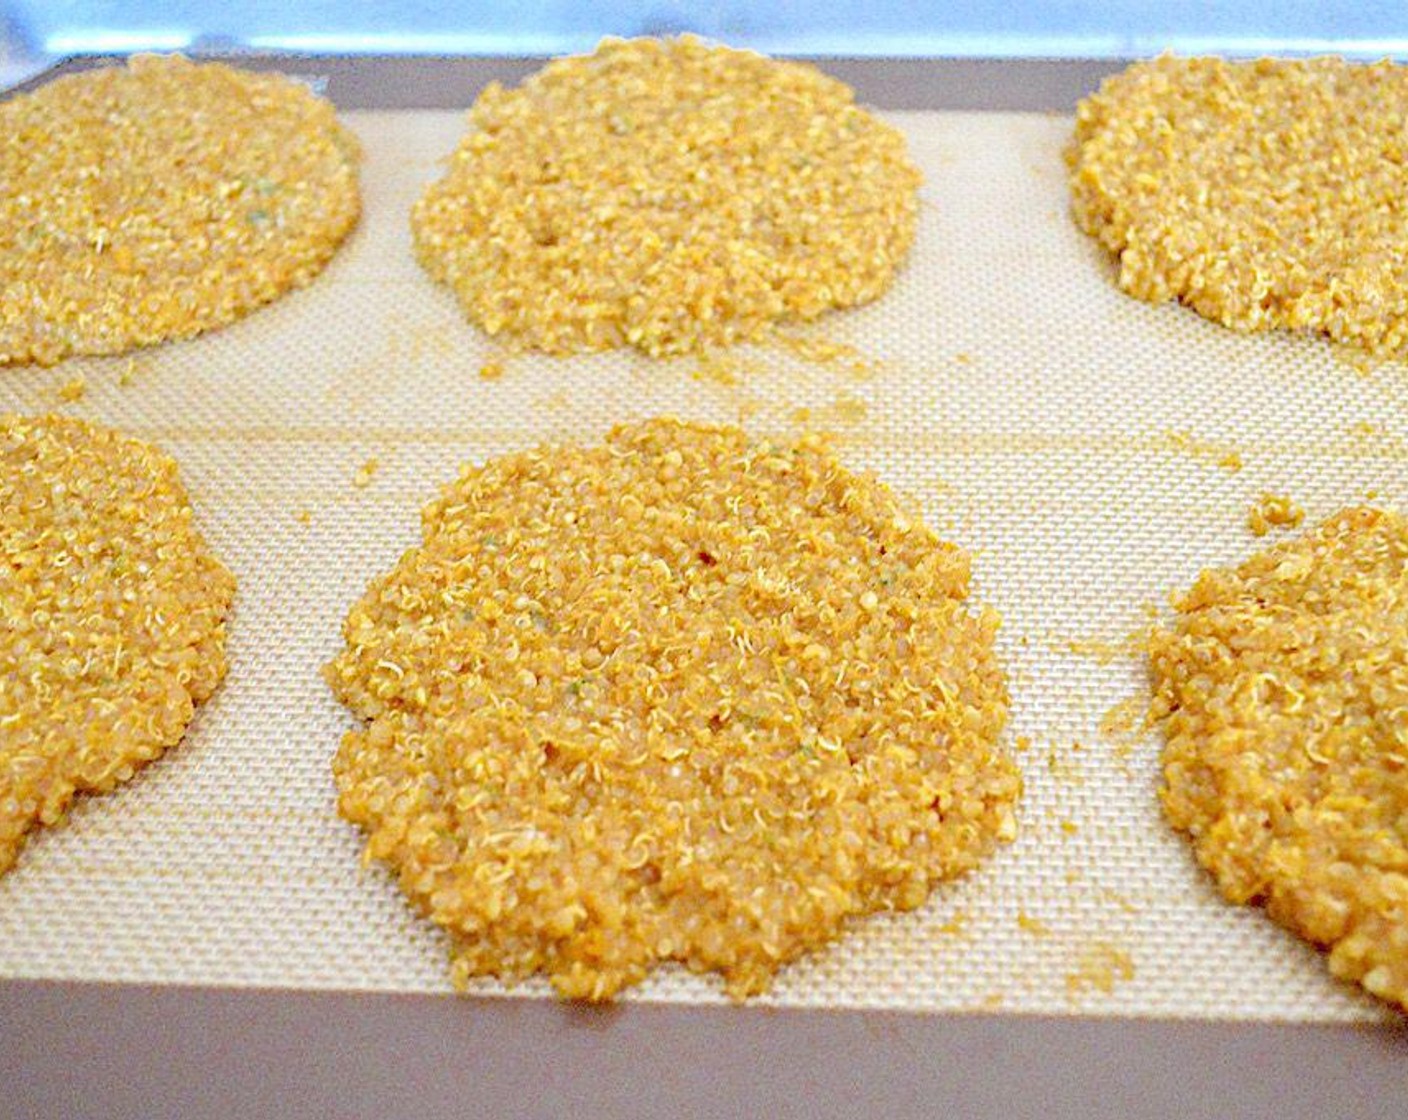 step 6 Use wet hands to form 10-12 patties out of the mixture, depending on how big you want them. Evenly lay them out on the sheet trays and bake them for 30 minutes or until set and slightly crisp along the edges.